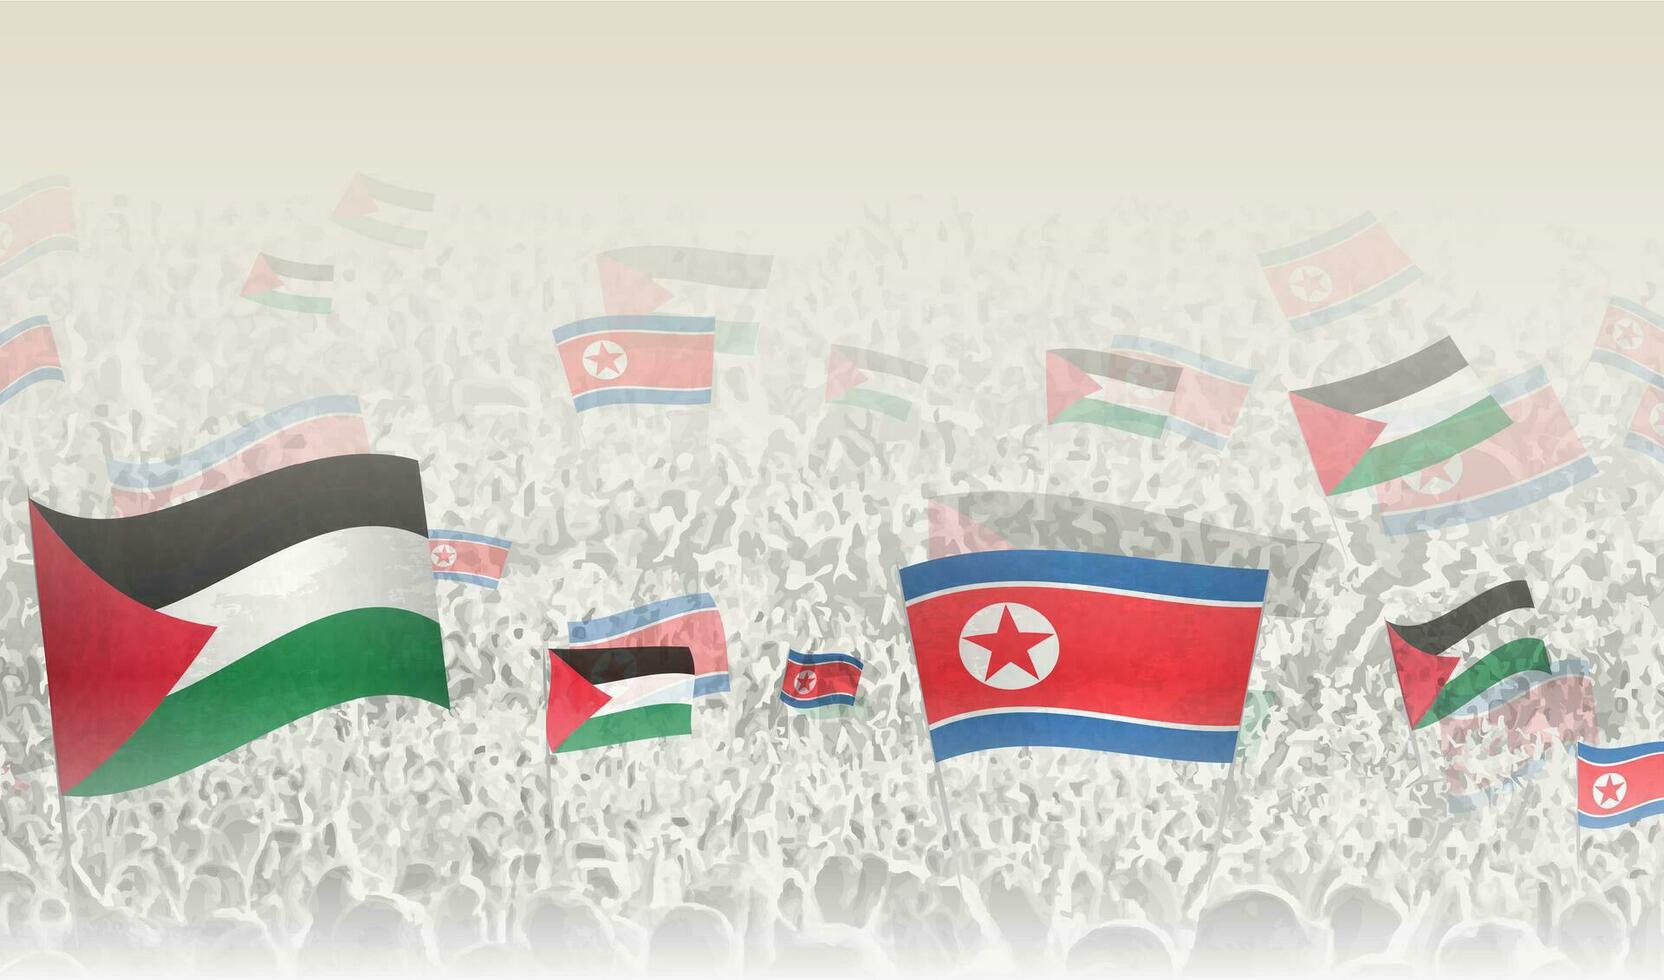 Palestine and North Korea flags in a crowd of cheering people. vector